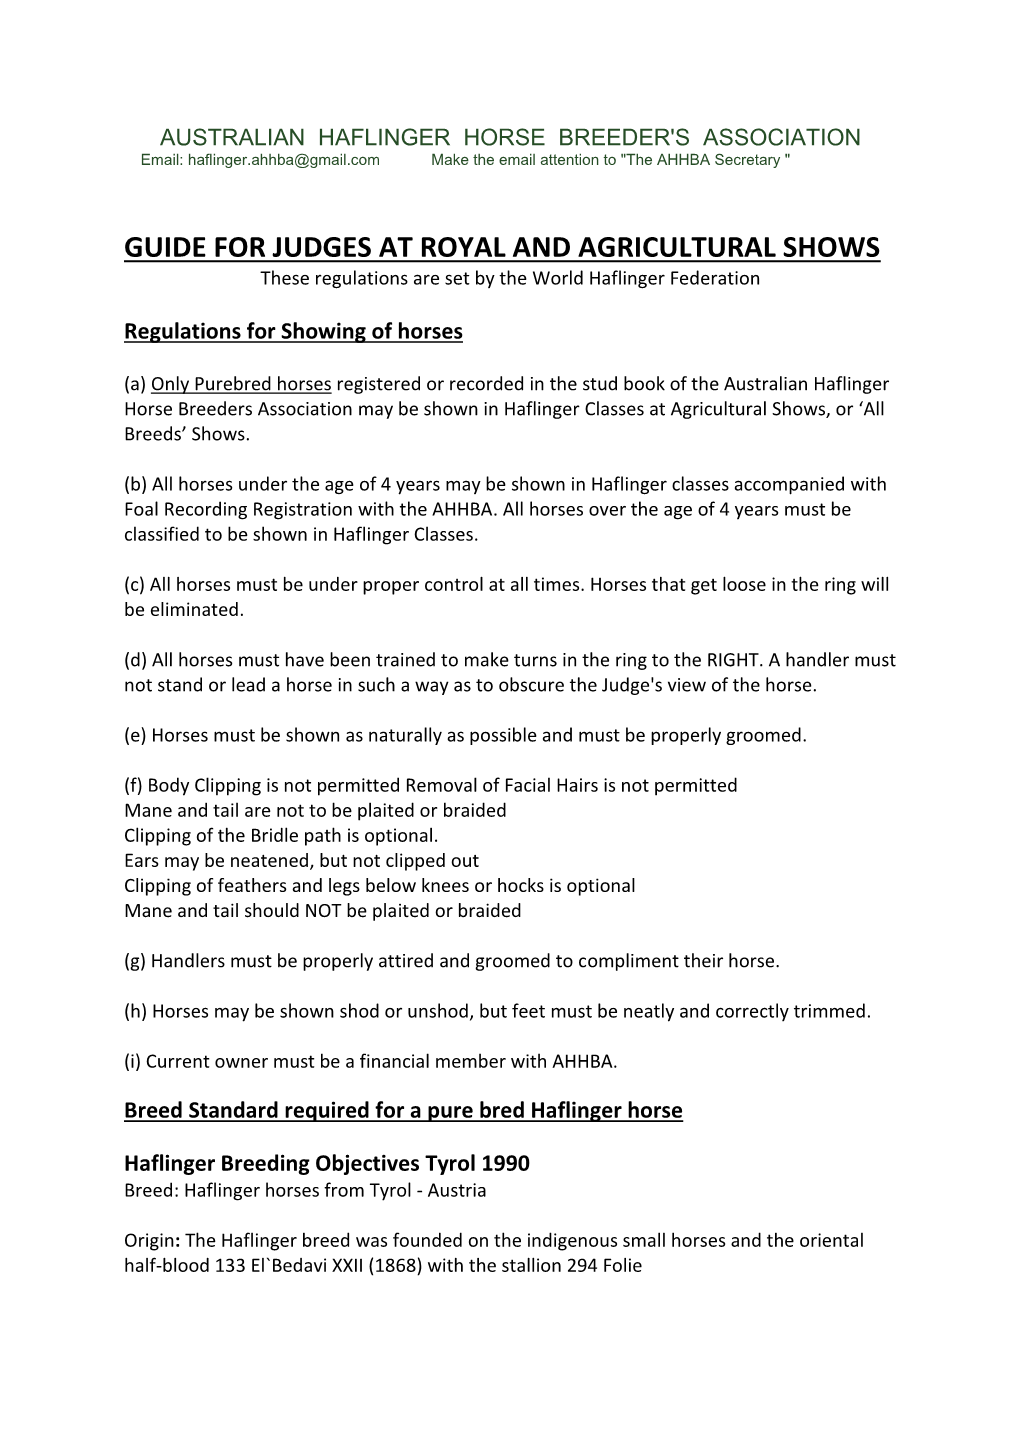 GUIDE for JUDGES at ROYAL and AGRICULTURAL SHOWS These Regulations Are Set by the World Haflinger Federation